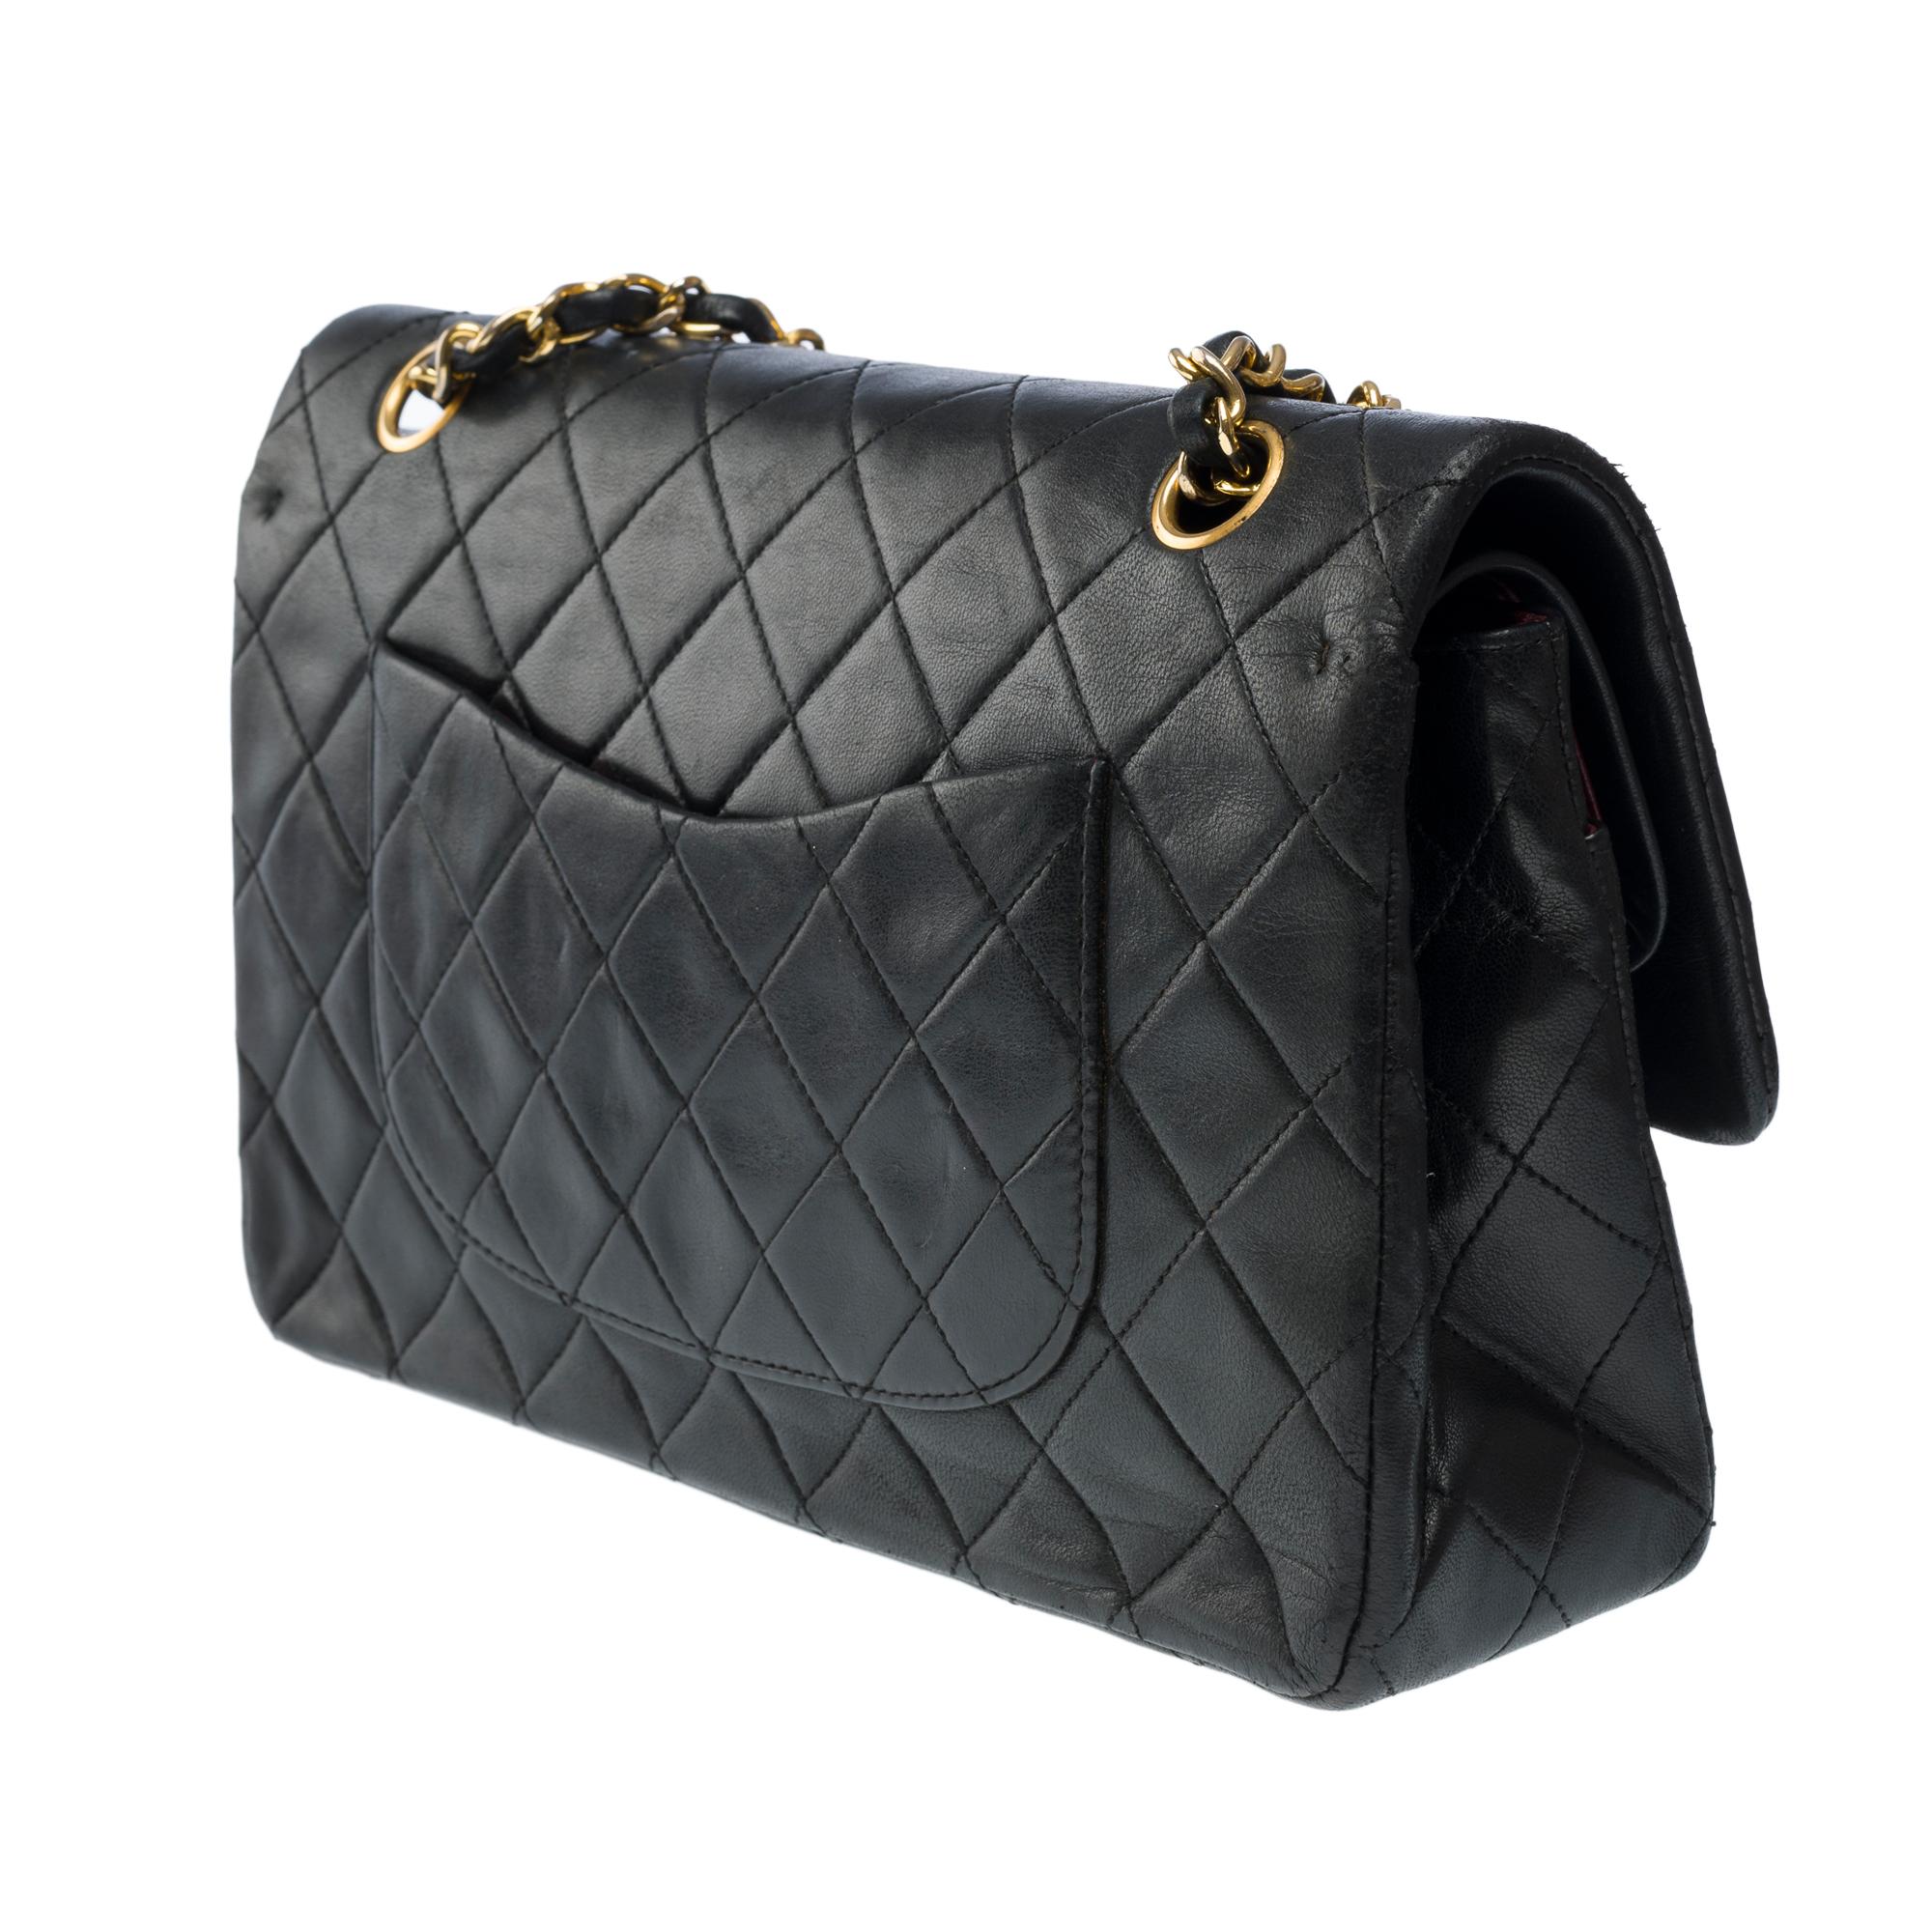 Chanel Timeless double flap shoulder bag in black quilted lambskin leather, GHW For Sale 1